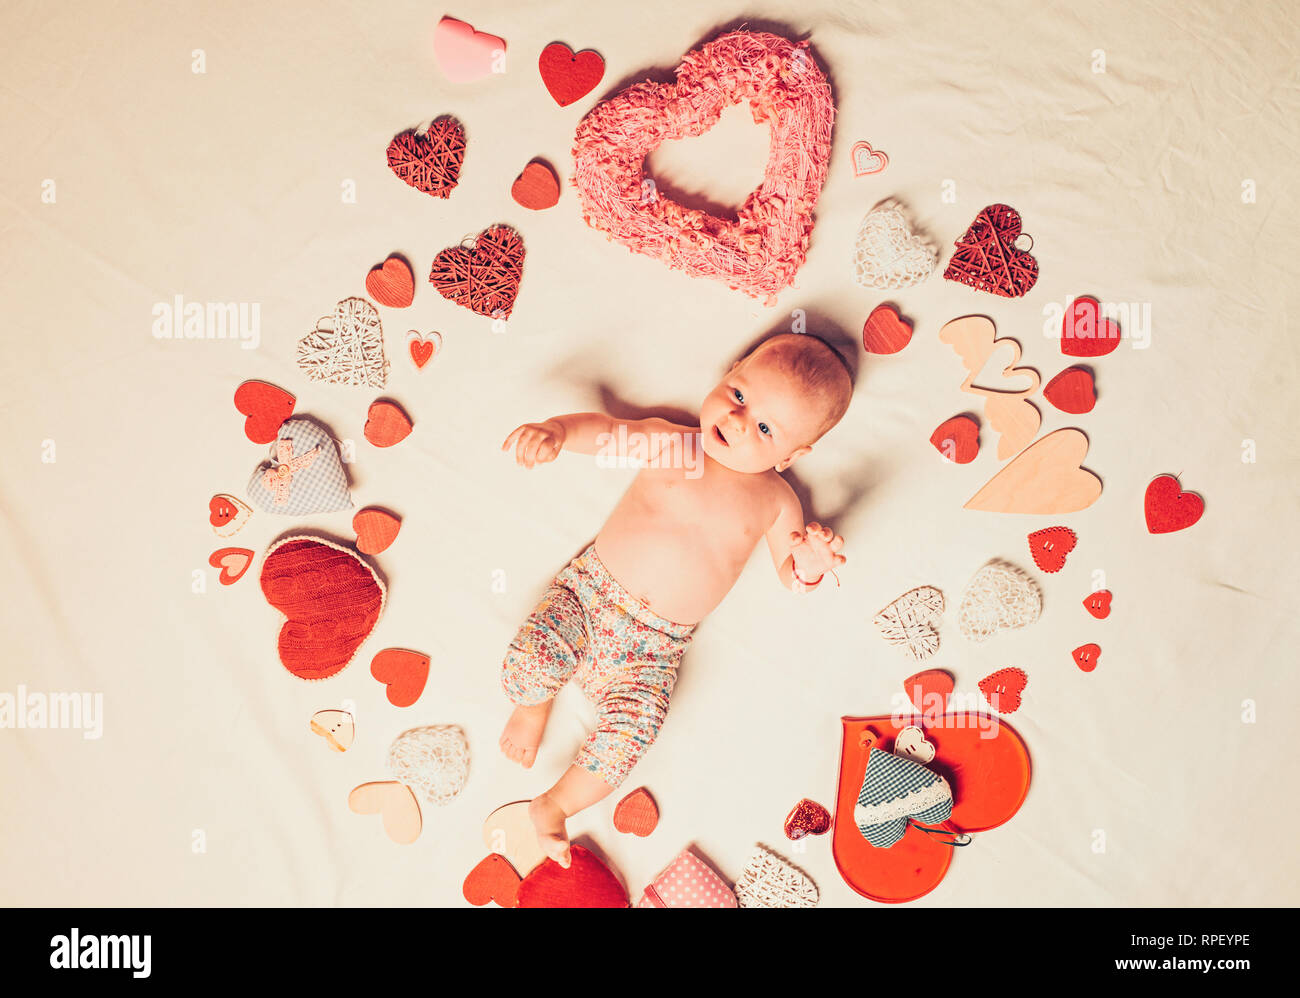 Love of my life. Childhood happiness.Valentines day. Sweet little baby. New life and birth. Family. Child care. Small girl among red hearts. Love Stock Photo